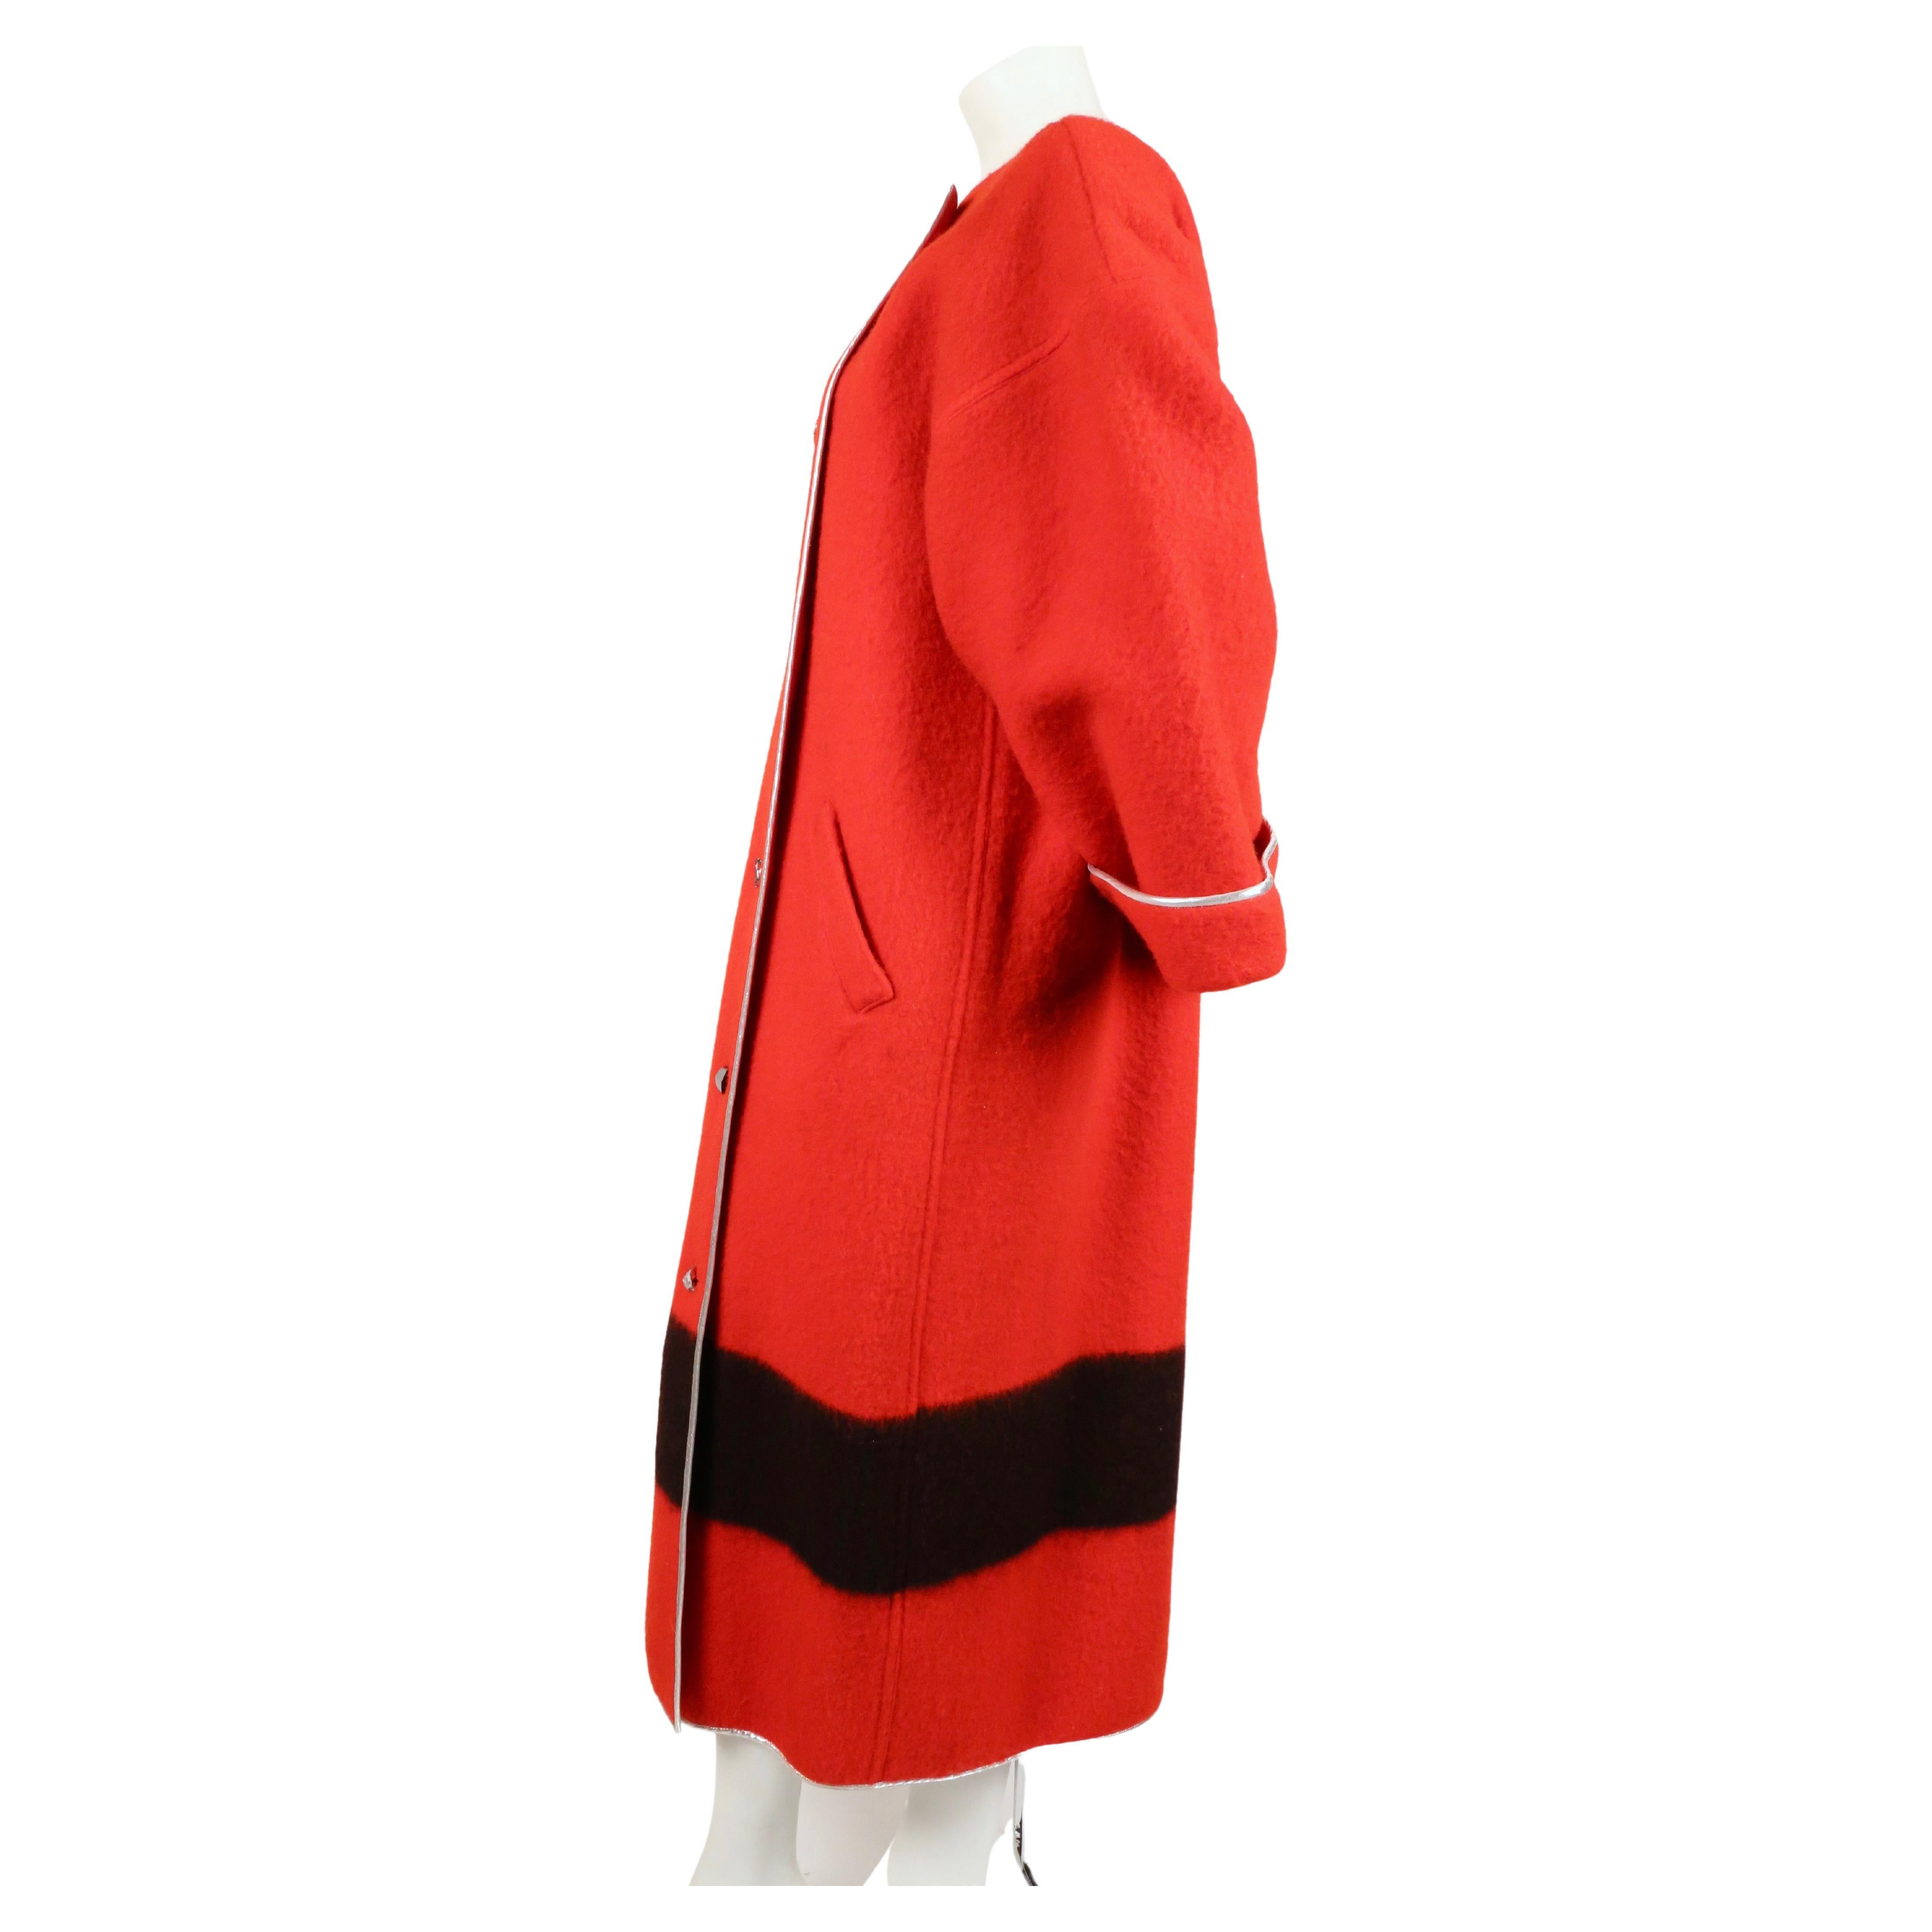 Unique red blanket coat with black stripe, silver piping and unique faceted buttons from Geoffrey Beene dating to the 1980's. Labeled a U.S. size 6 however it can fit many sizes to the oversized cut. Measure approximately: 23